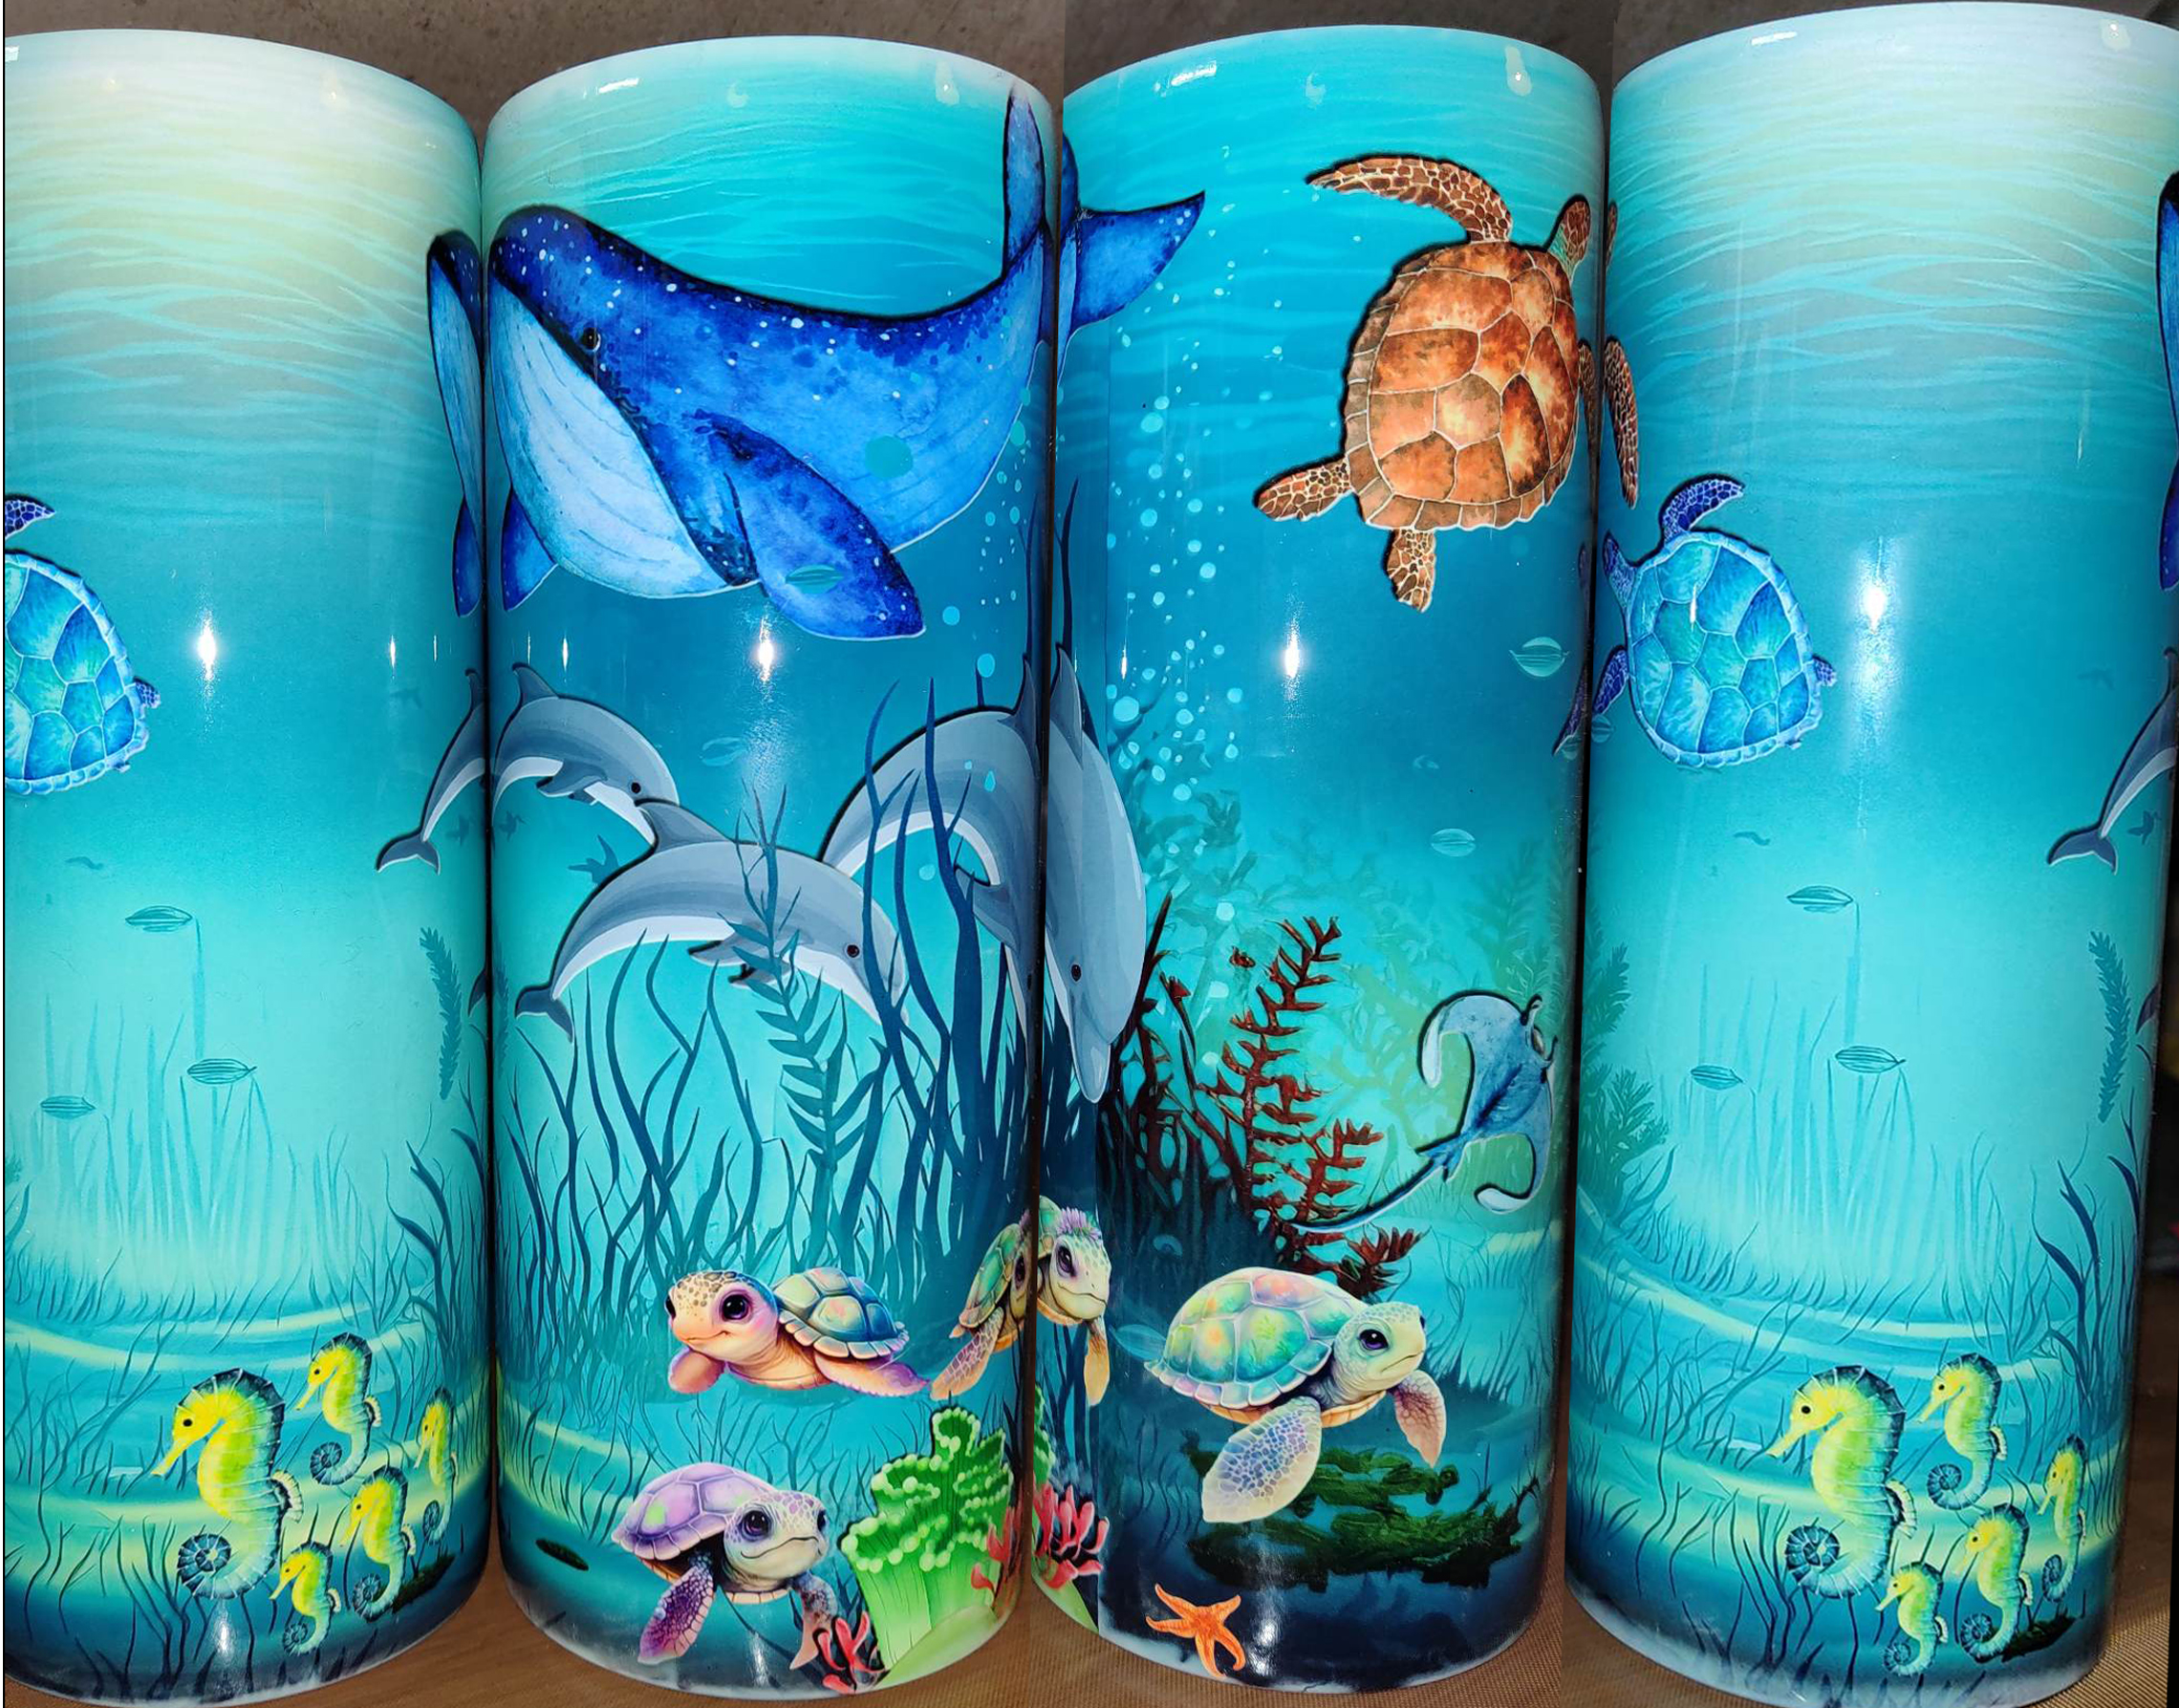 Life Under The Sea made with sublimation printing